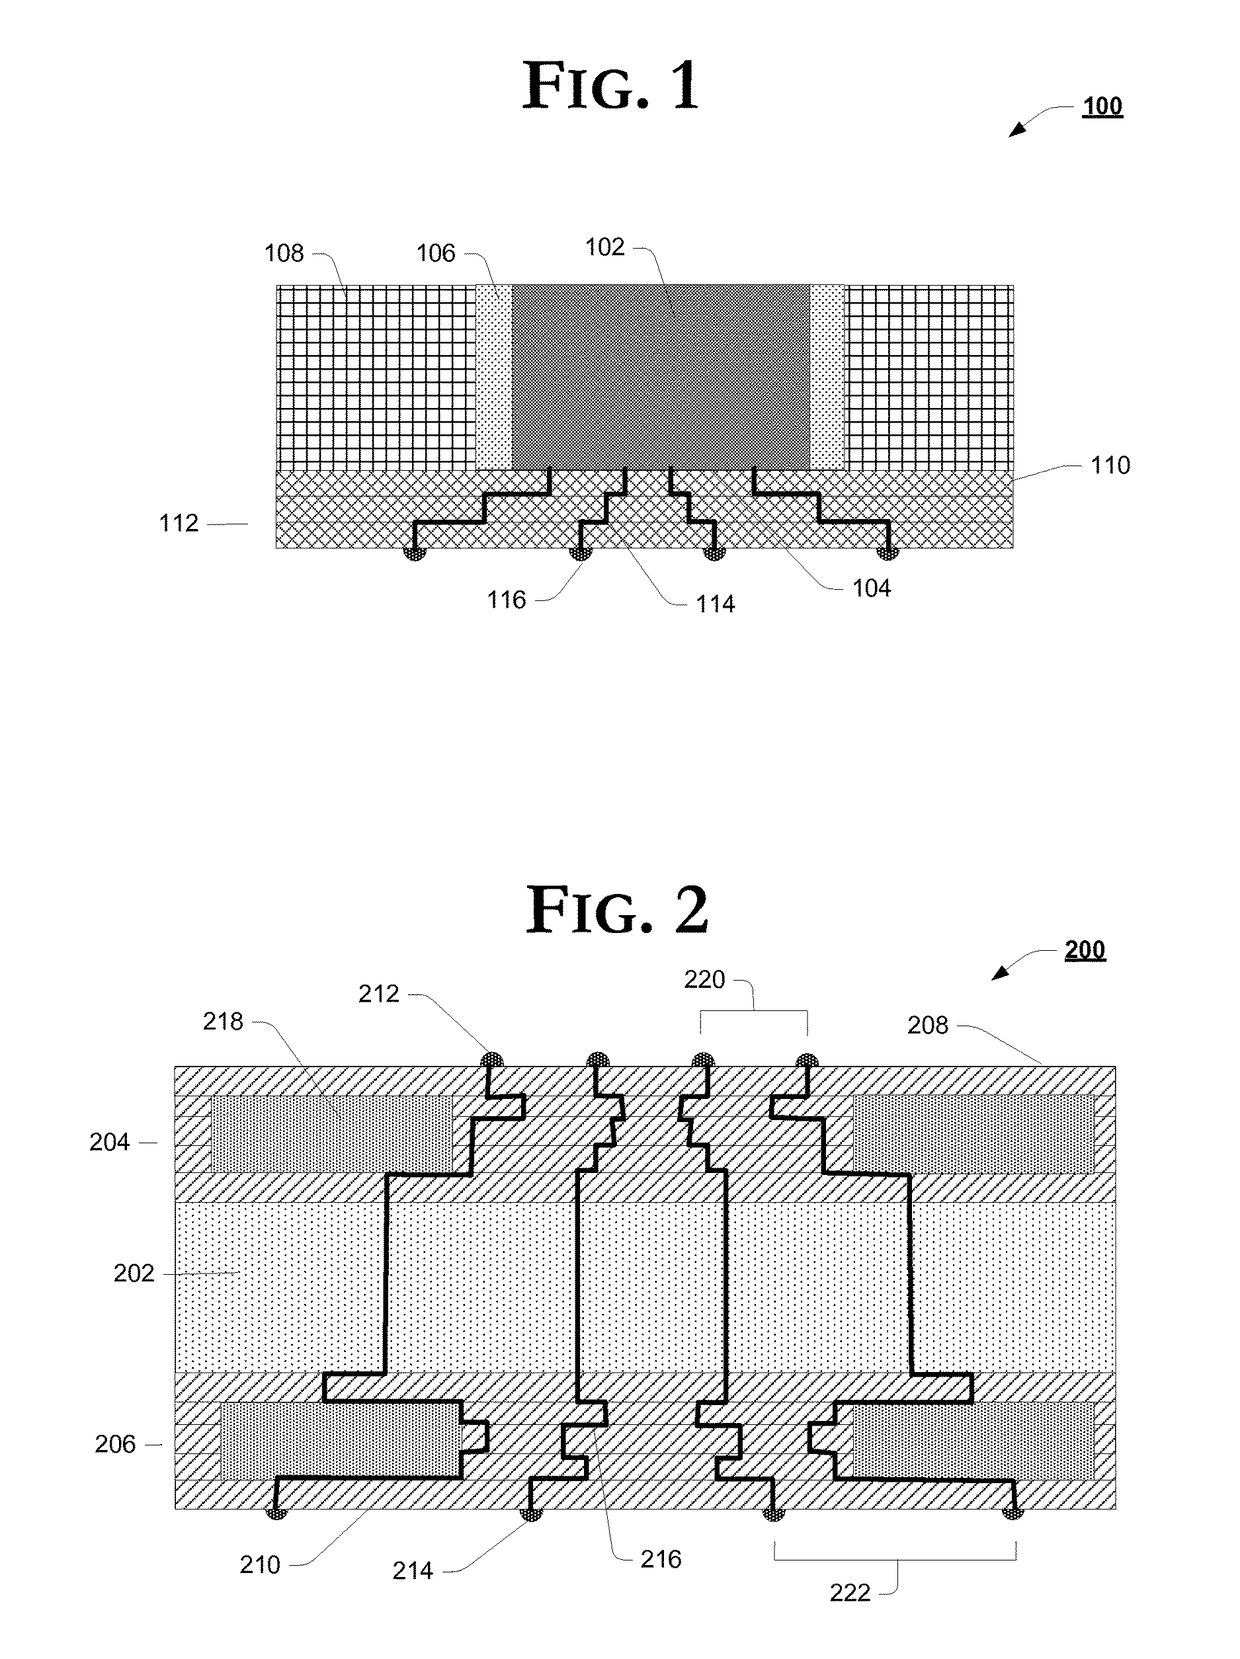 Integrated circuit packages including high density bump-less build up layers and a lesser density core or coreless substrate